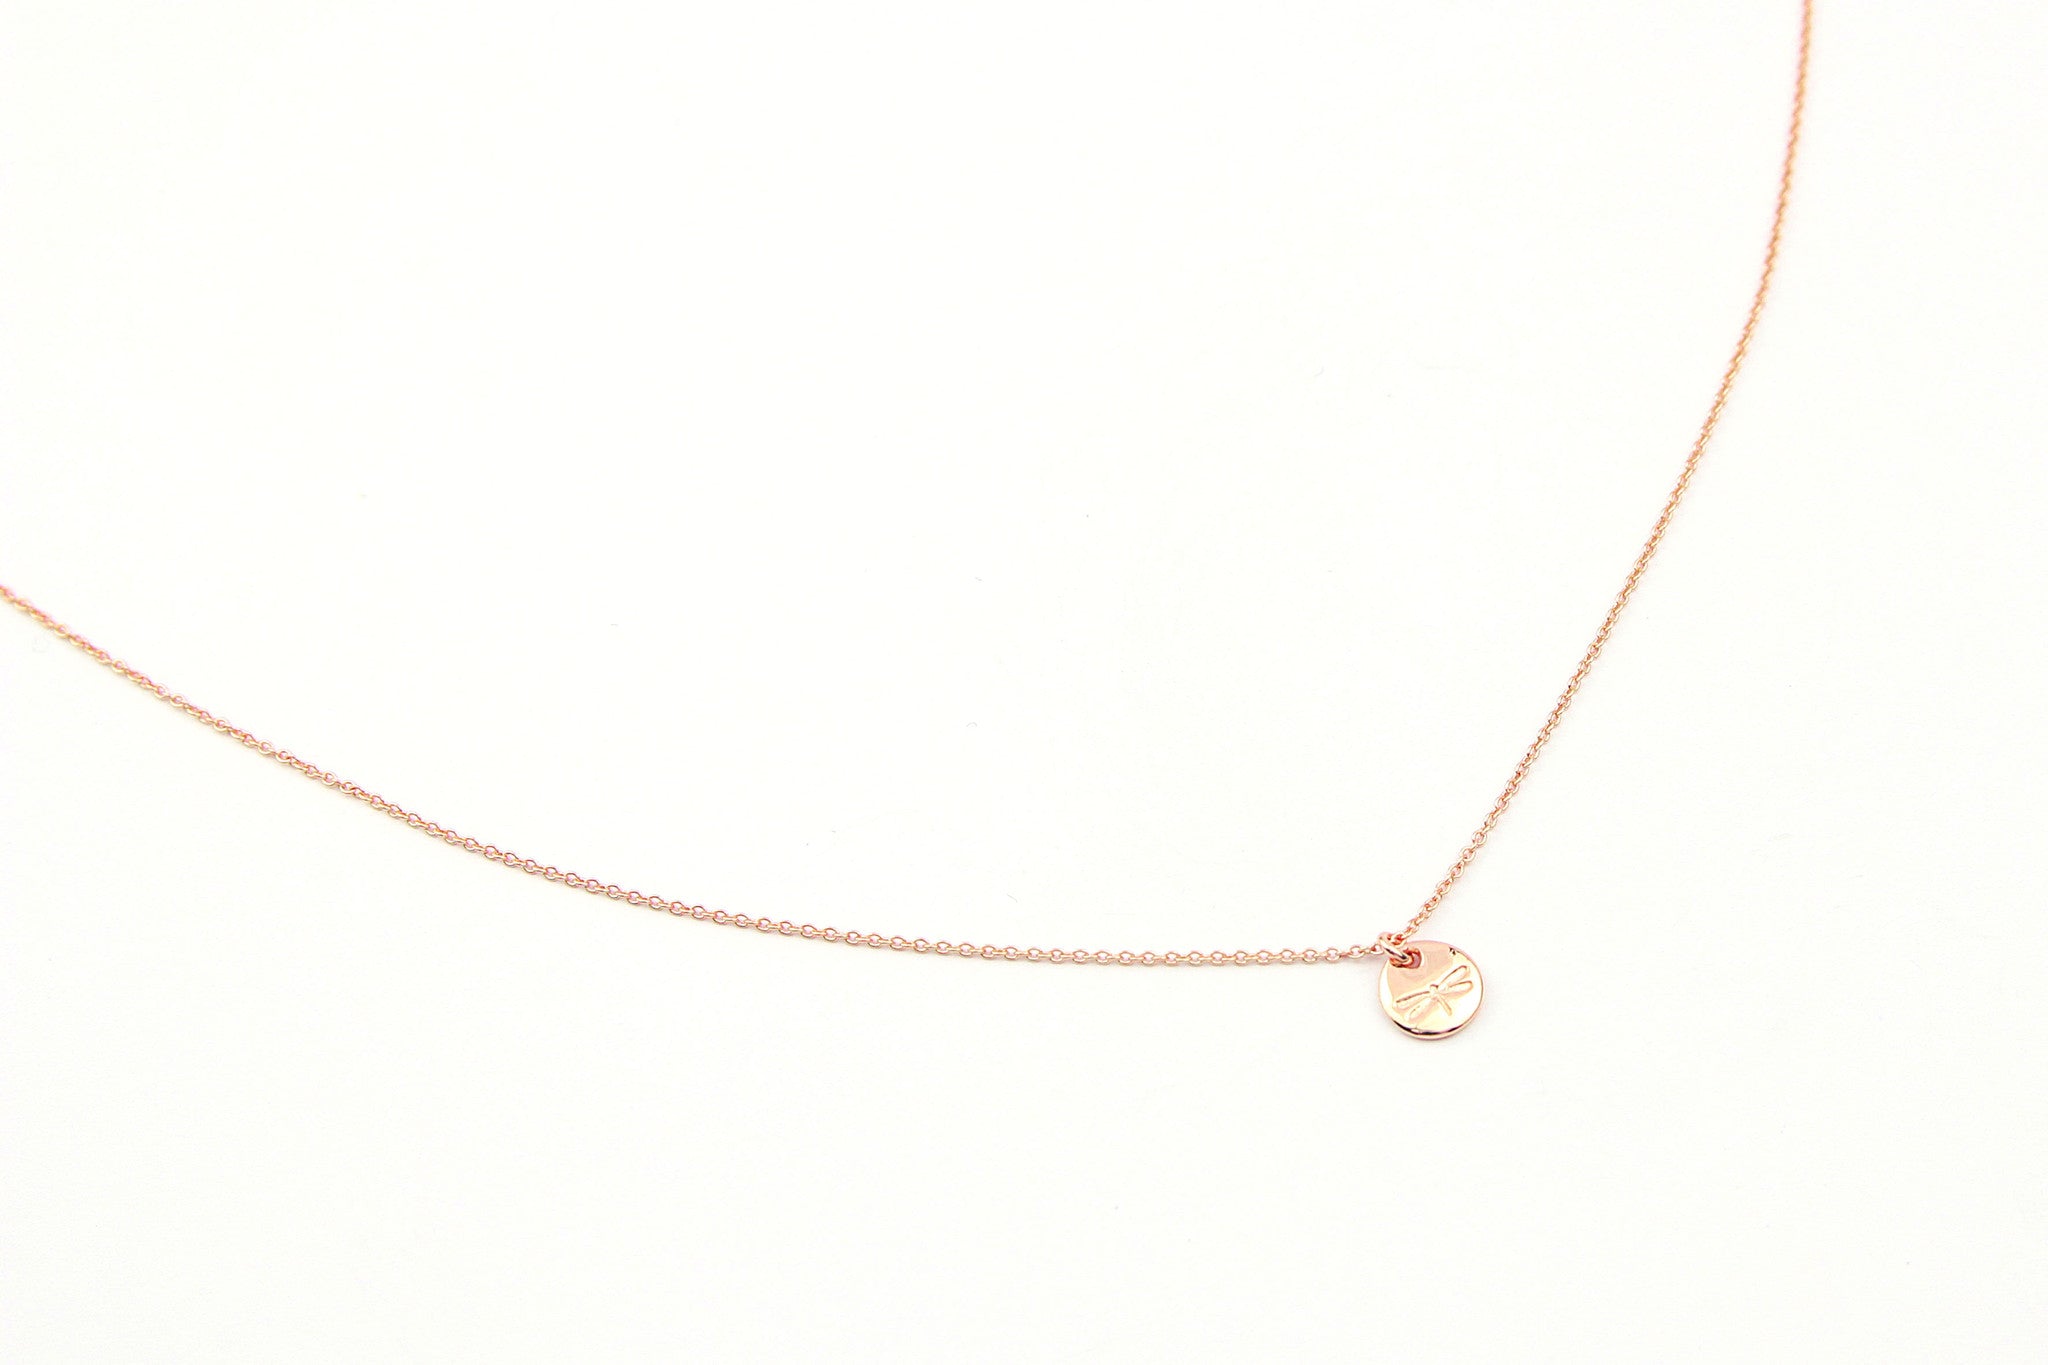 jewelberry necklace kette dragonfly token anchor chain rose gold plated sterling silver fine jewelry handmade with love fairtrade